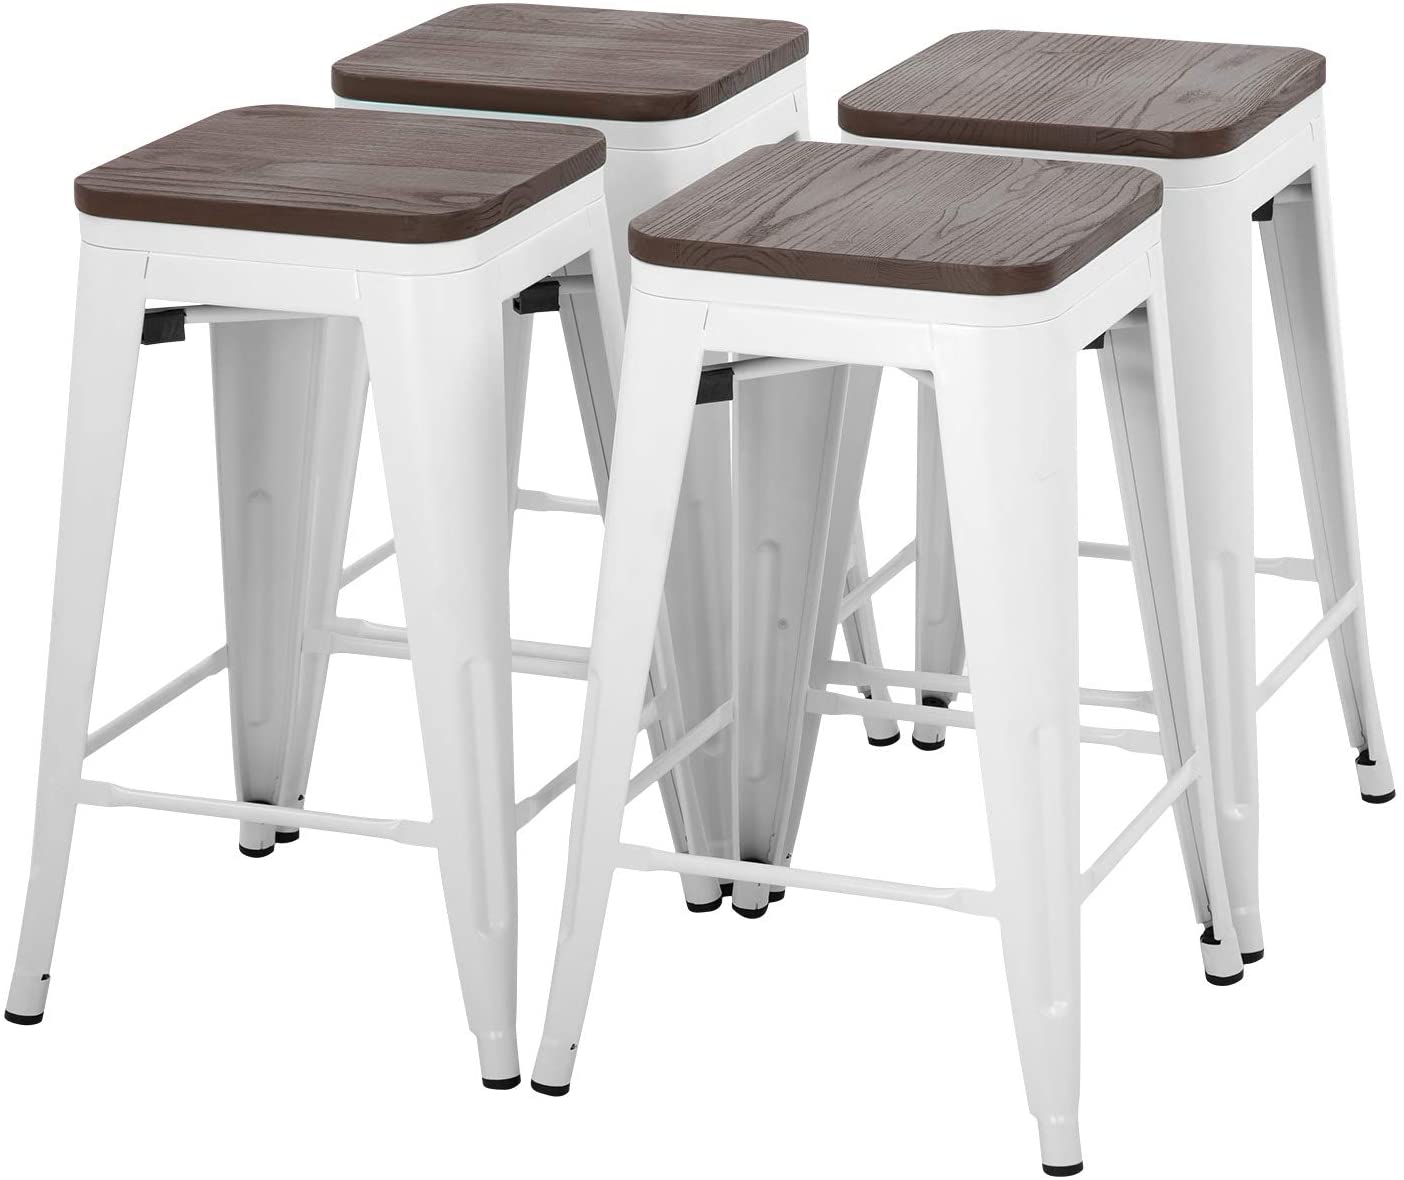 24 Inches Metal Bar Stools Set of 4 Counter Height Wood Seat Barstool Patio Stool Stackable Backless Stool Indoor Outdoor Metal Kitchen Stools Bar Chairs (White) - image 1 of 7